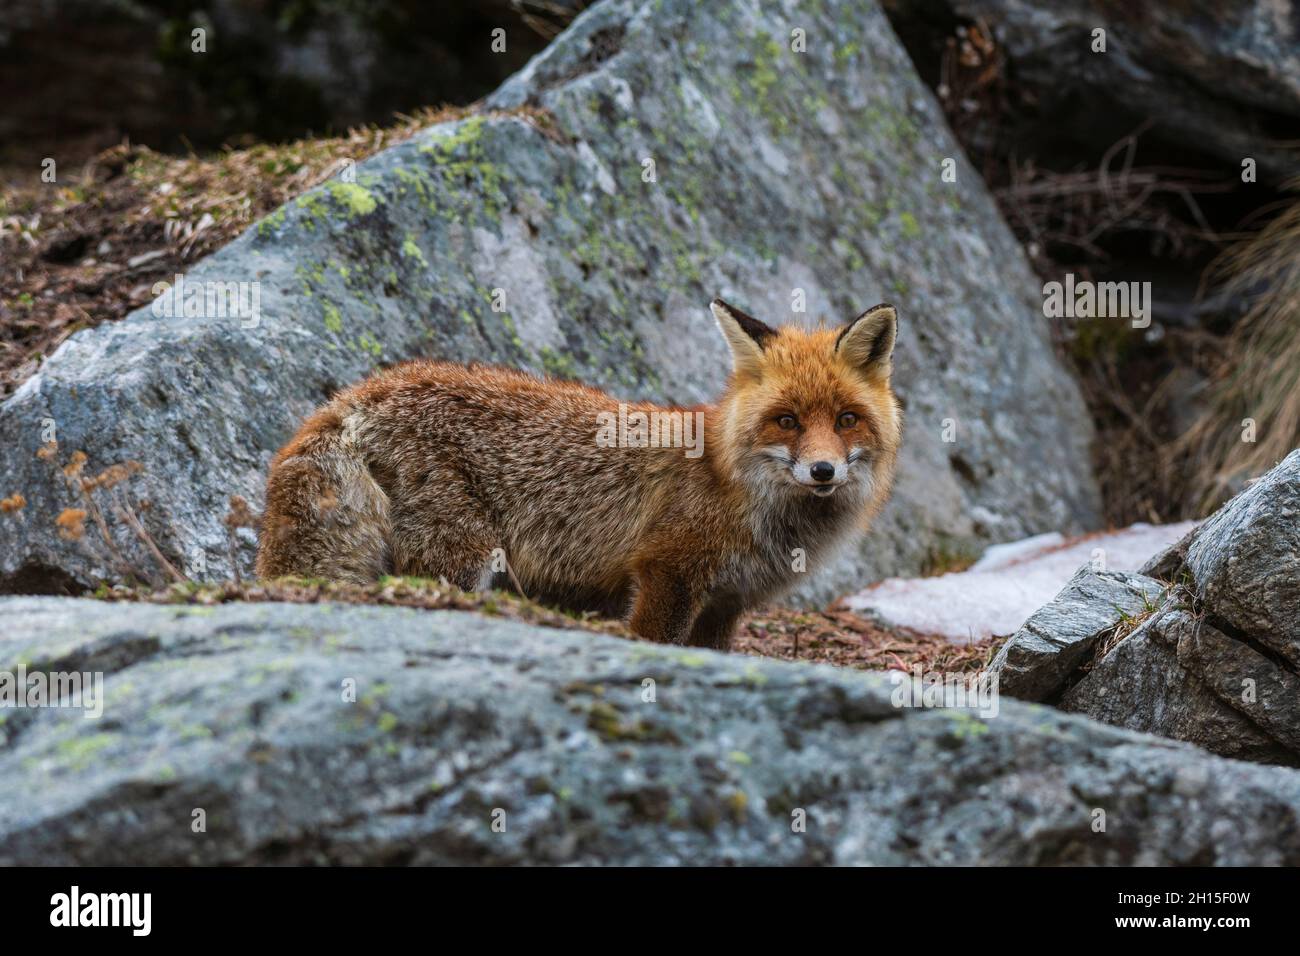 A red fox, Vulpes vulpes, standing on a rock. Aosta, Val Savarenche, Gran Paradiso National Park, Italy. Stock Photo